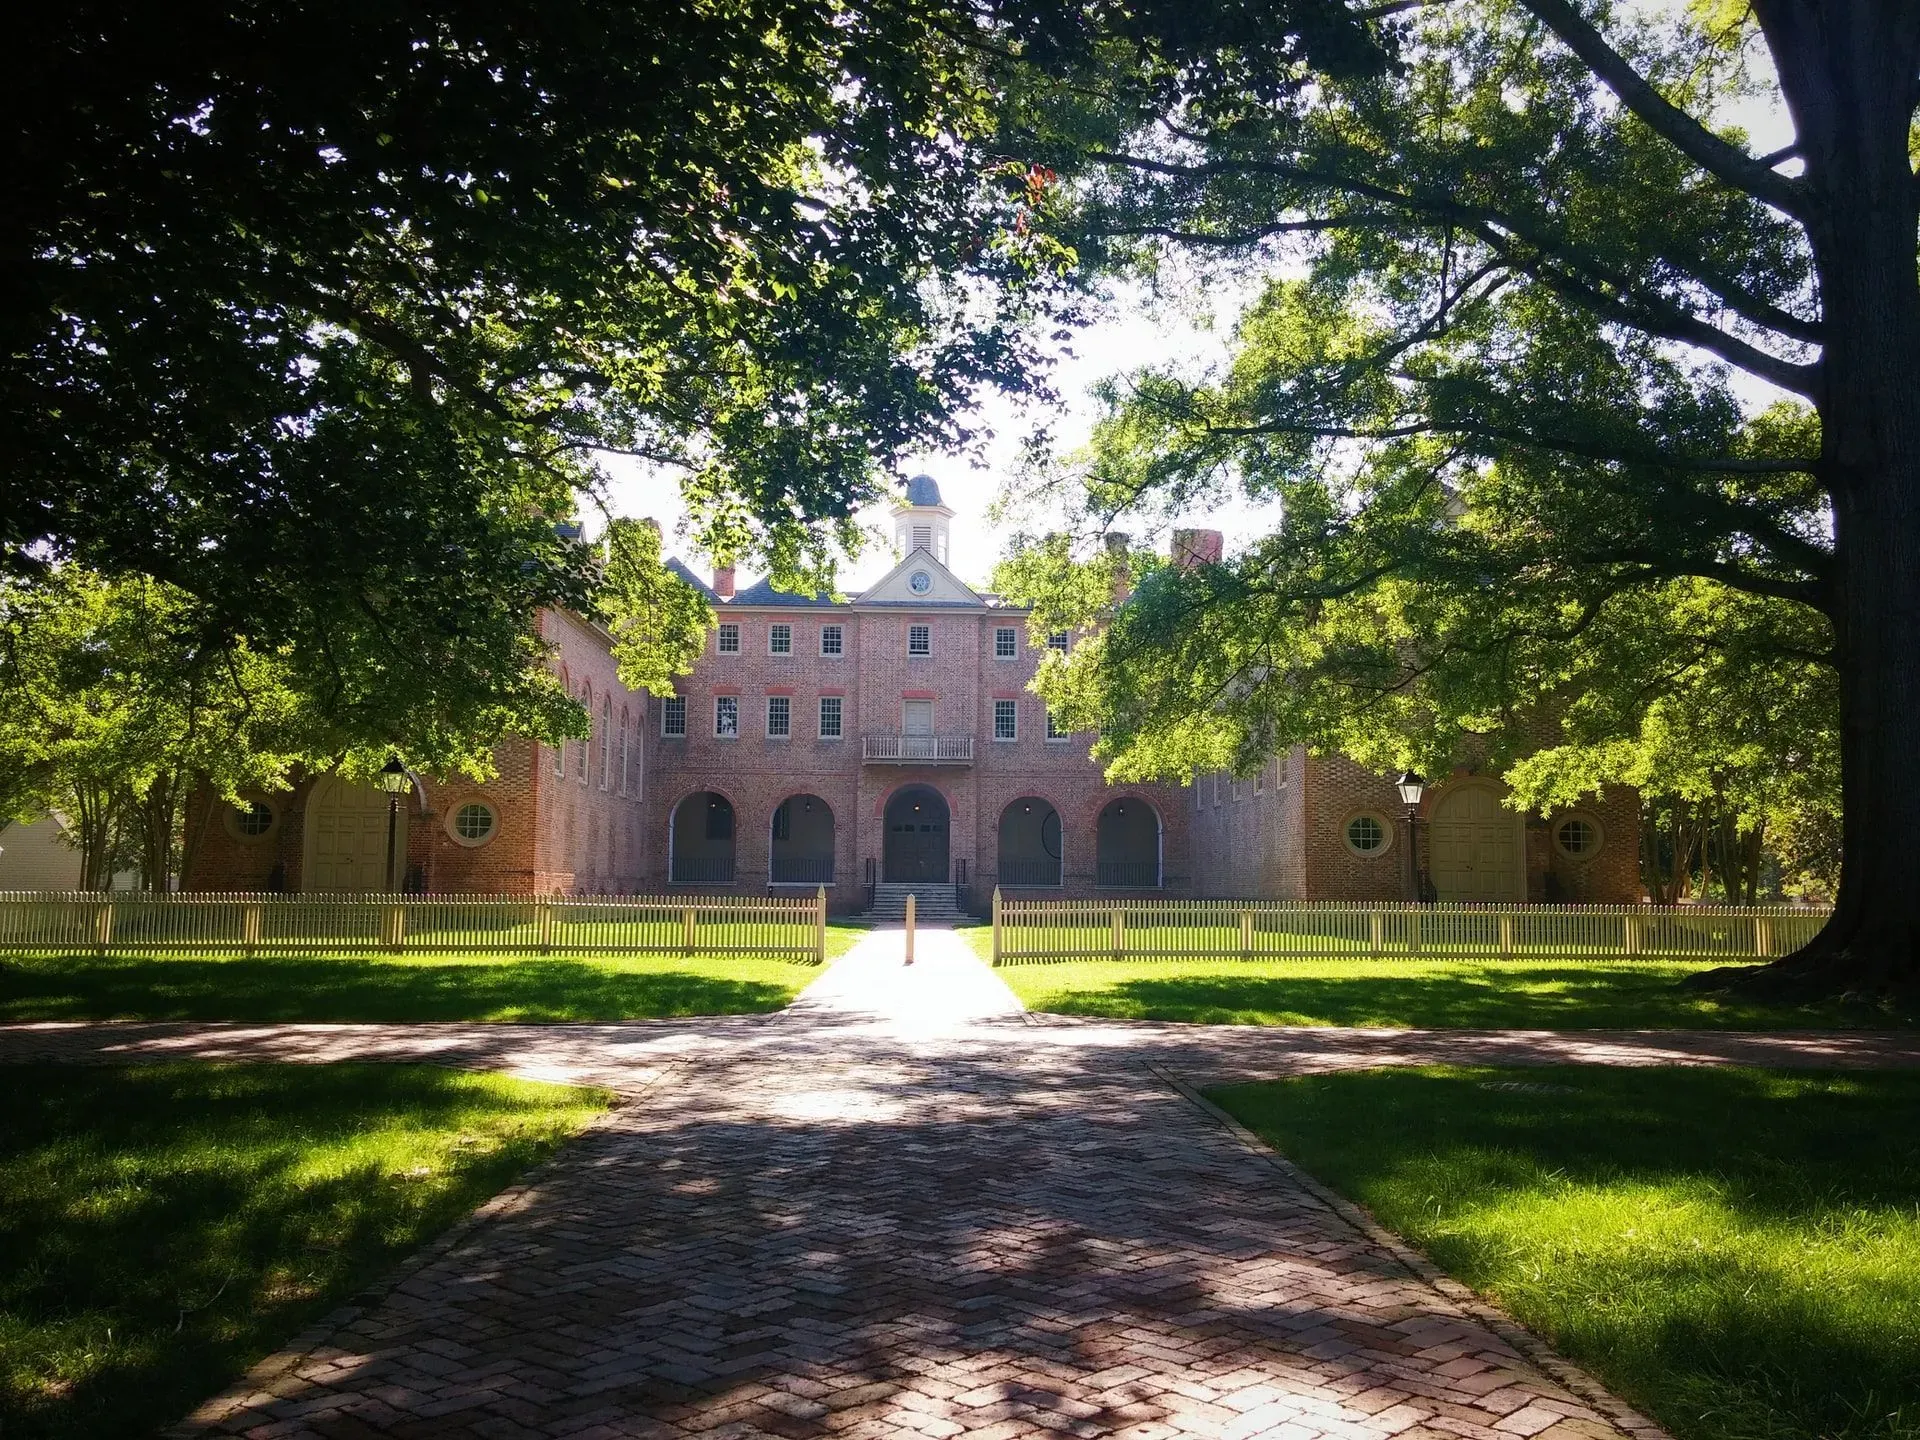 Enjoy these William and Mary facts about the royal college in America.